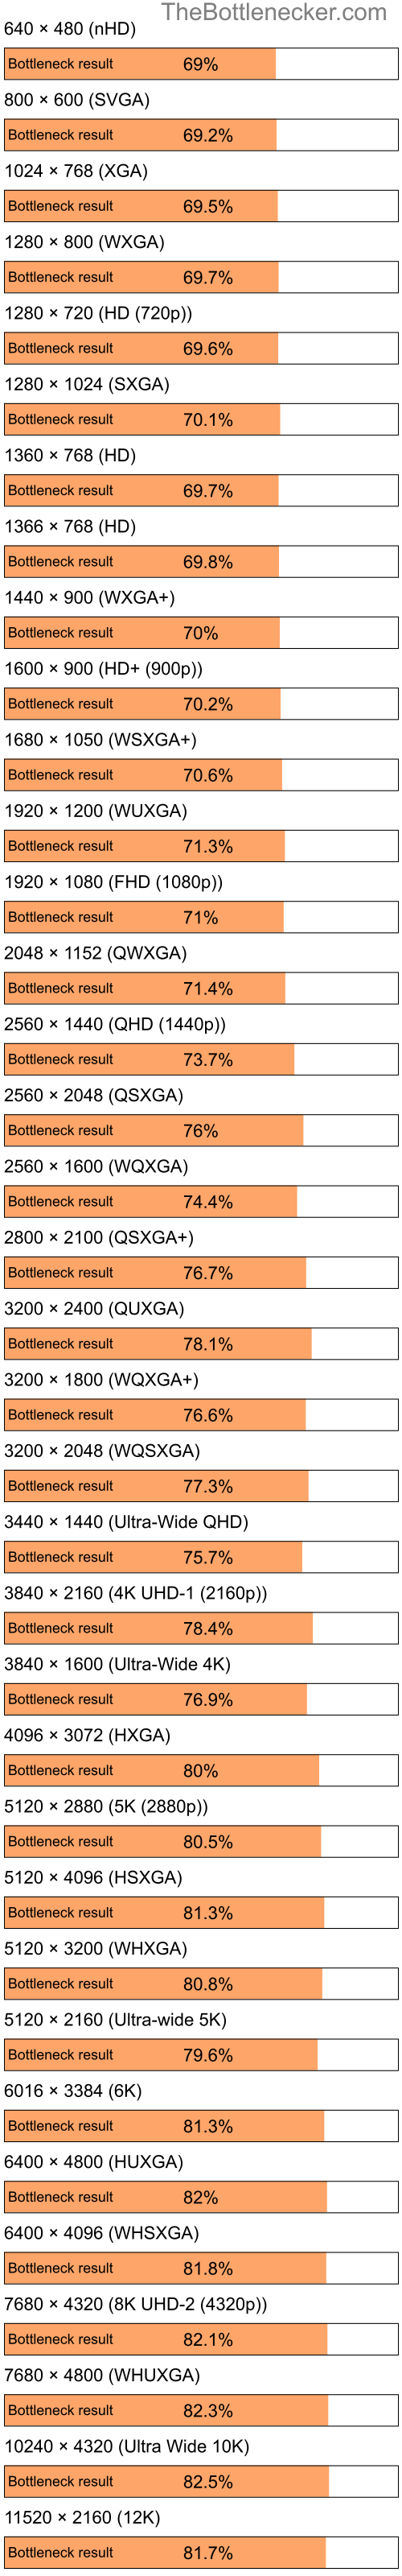 Bottleneck results by resolution for Intel Pentium 4 and NVIDIA Quadro FX 550 in General Tasks